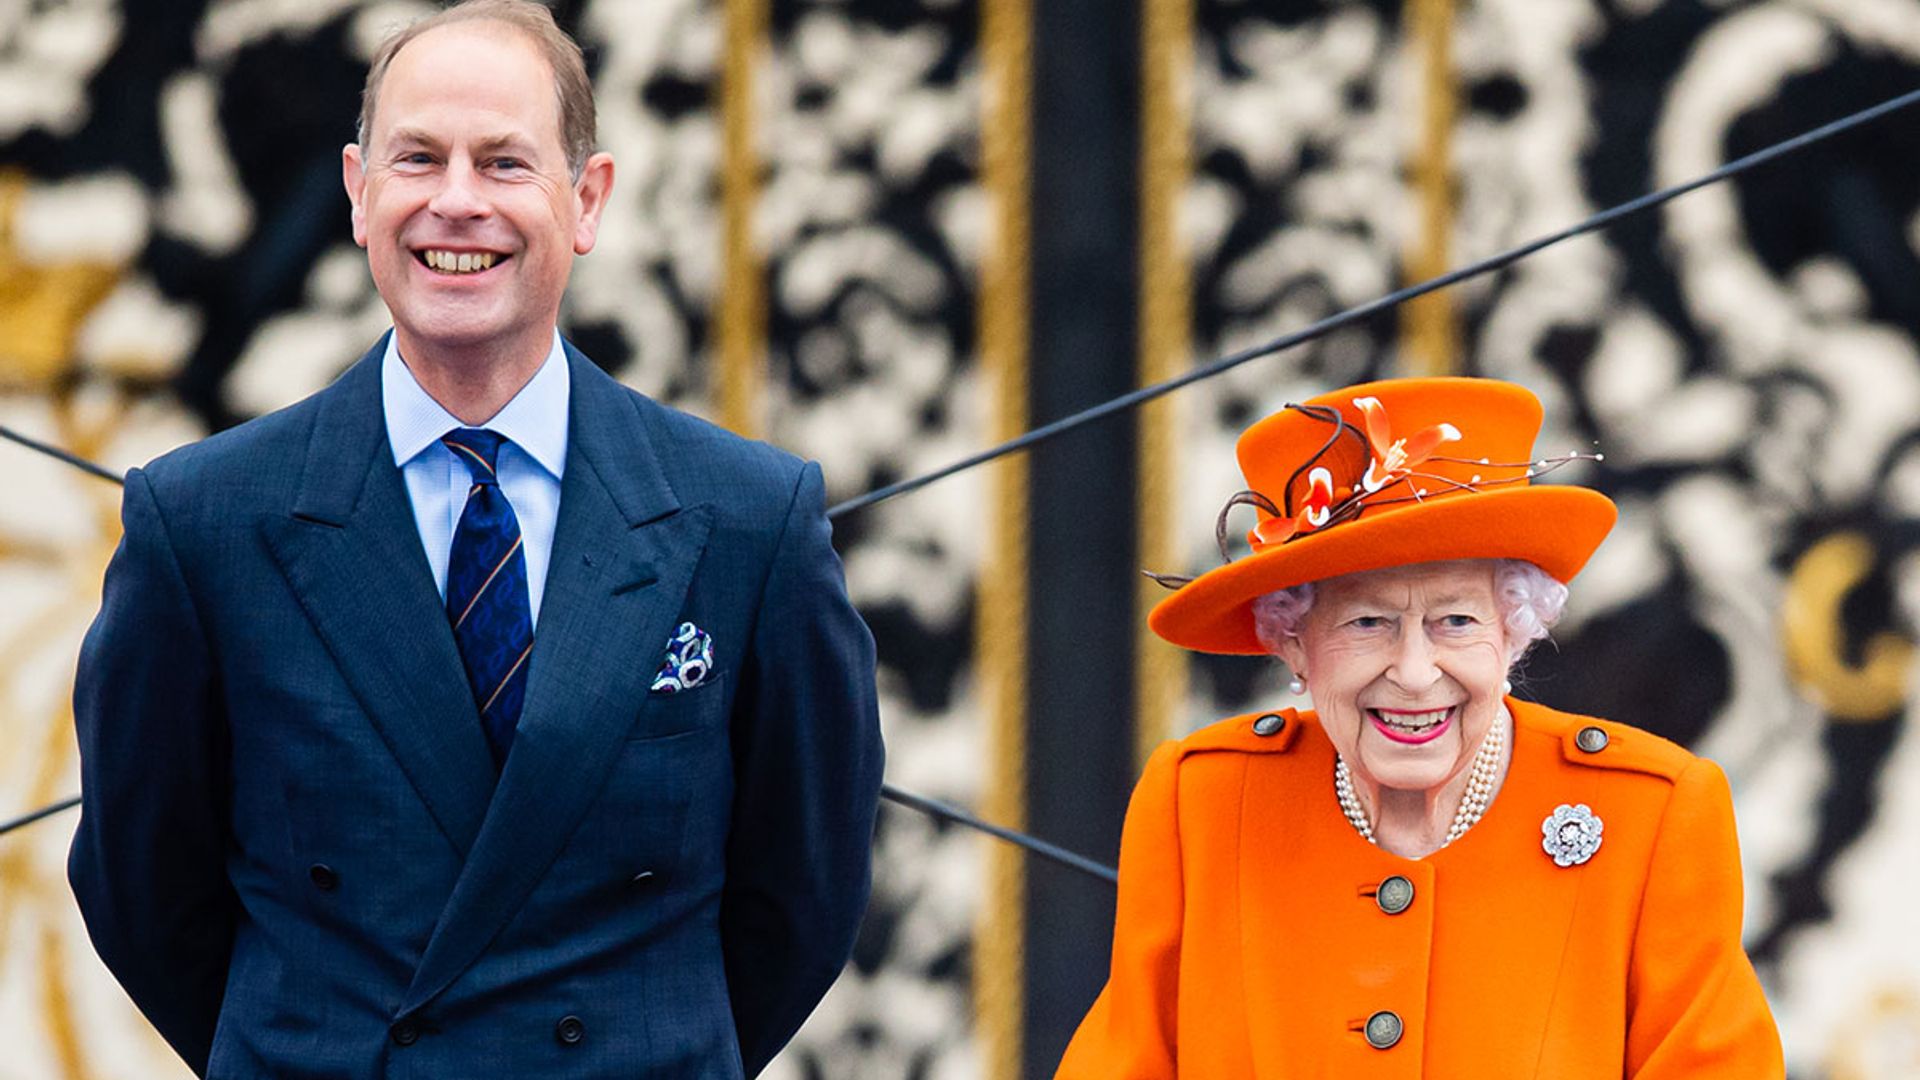 The Queen gives Prince Edward important role as she continues to rest at Windsor Castle